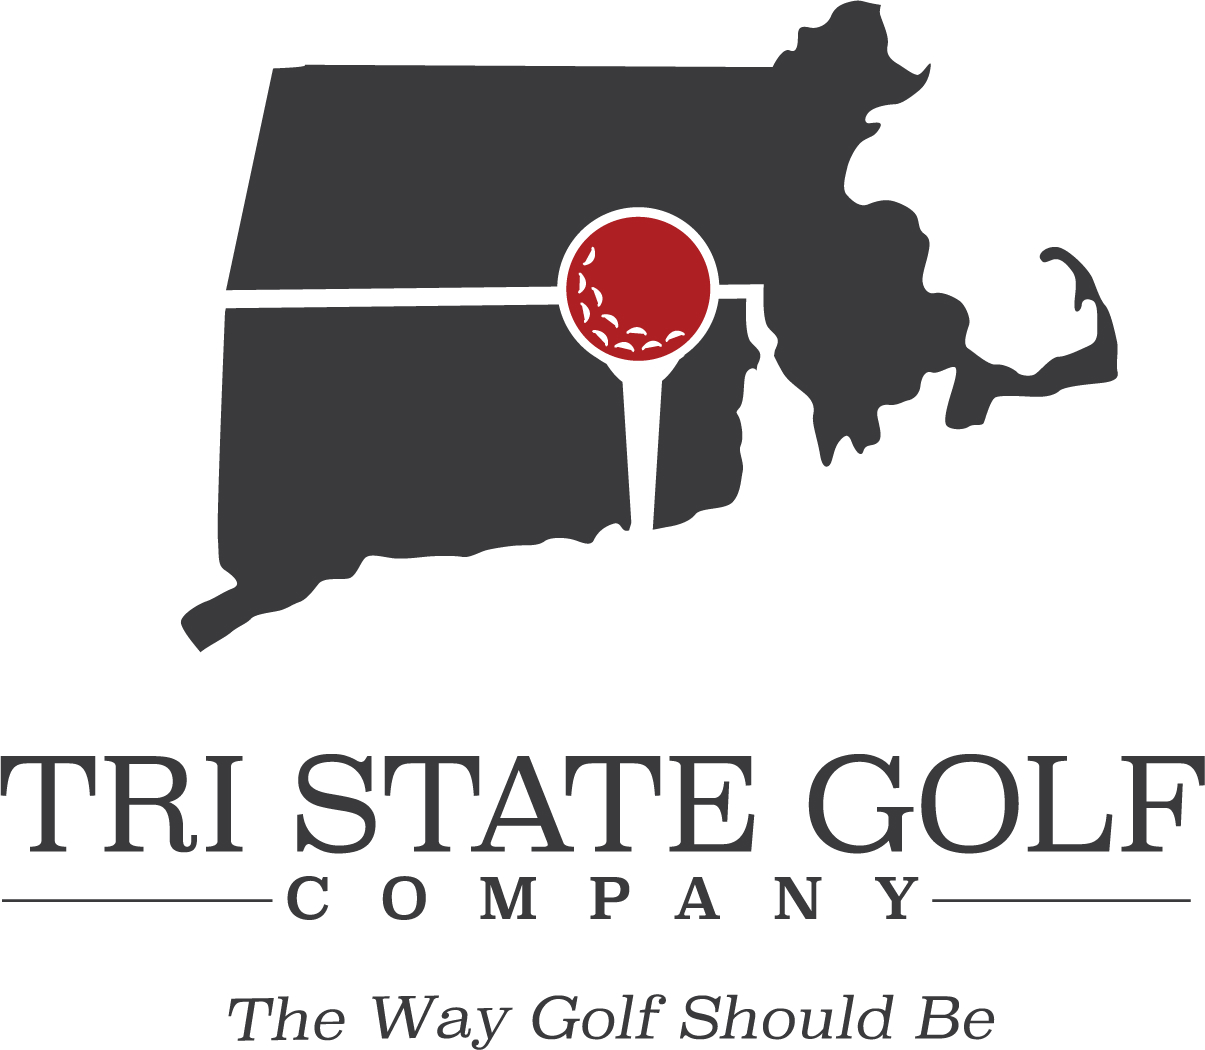 Managed by Tri State Golf Company